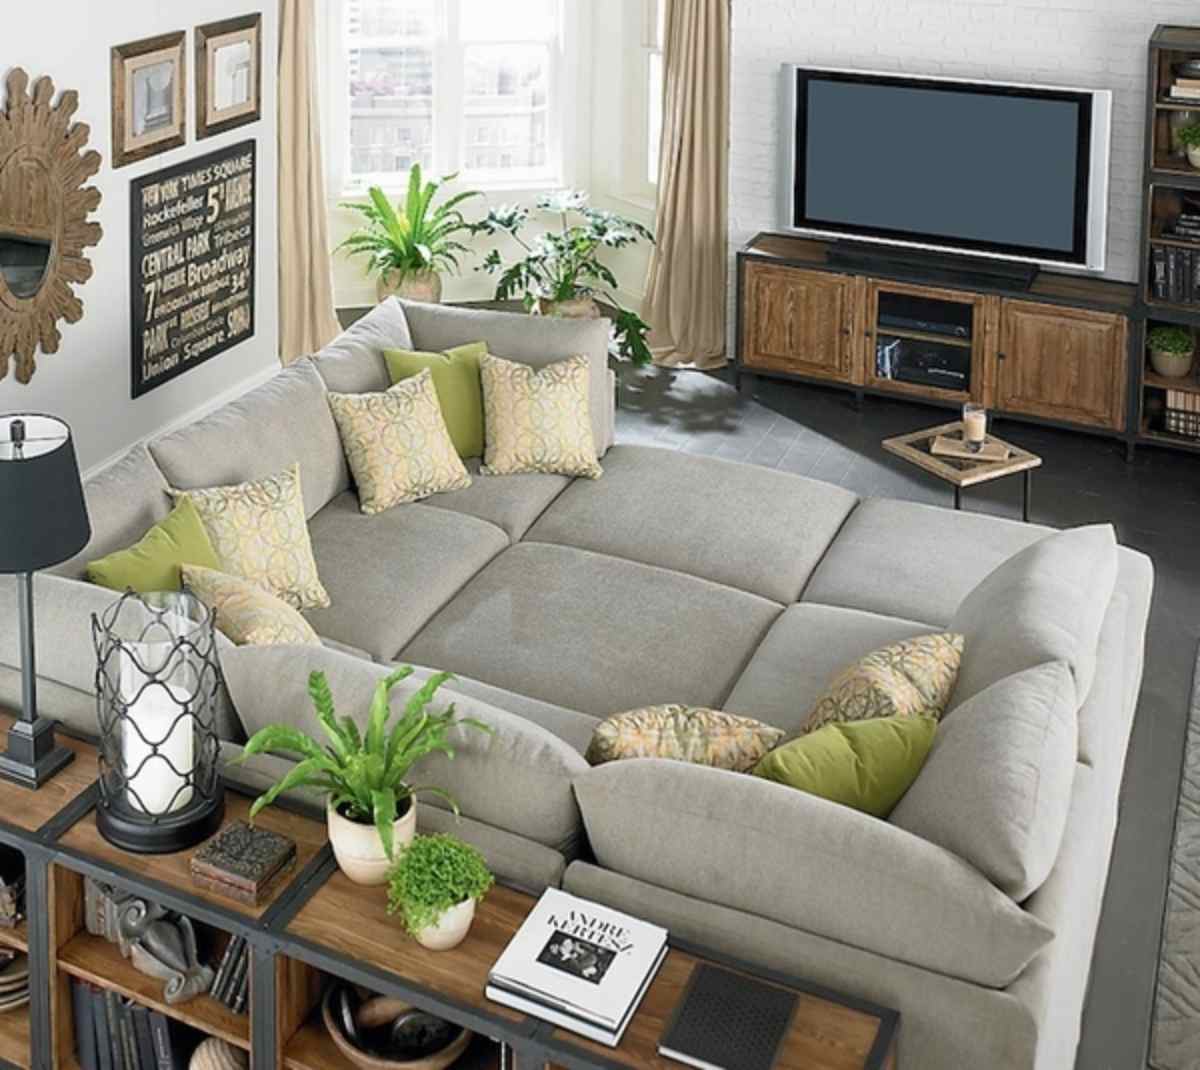 Oversized Couches Welcoming And Comfortable Or Huge And Clumsy